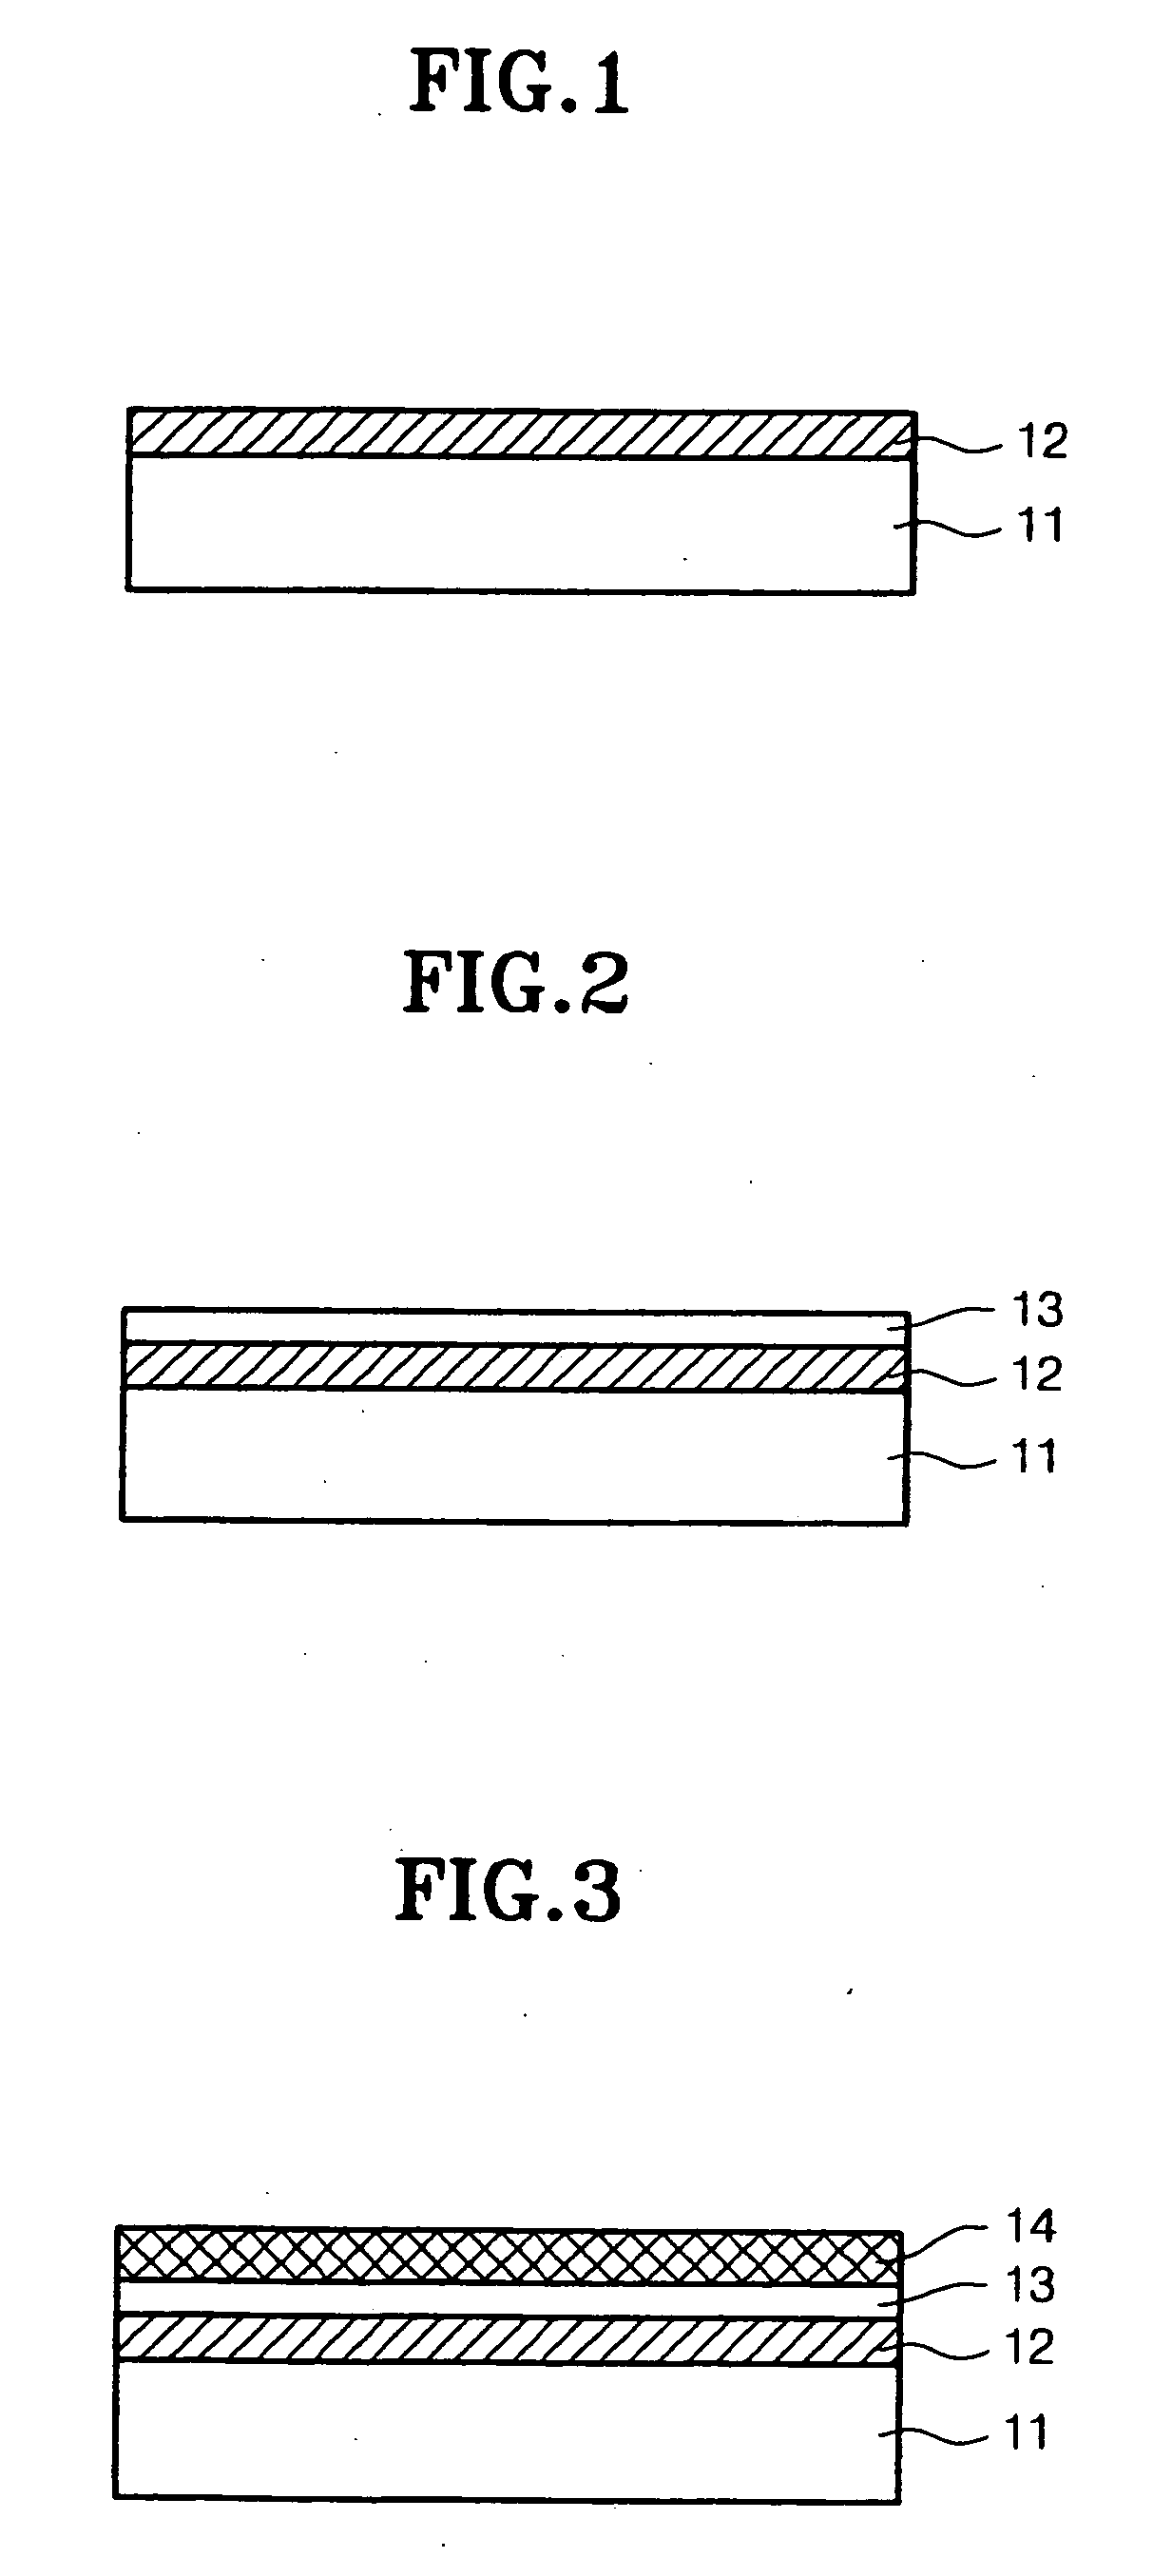 Method of forming capacitor of semiconductor device by successively forming a dielectric layer and a plate electrode in a single processing chamber